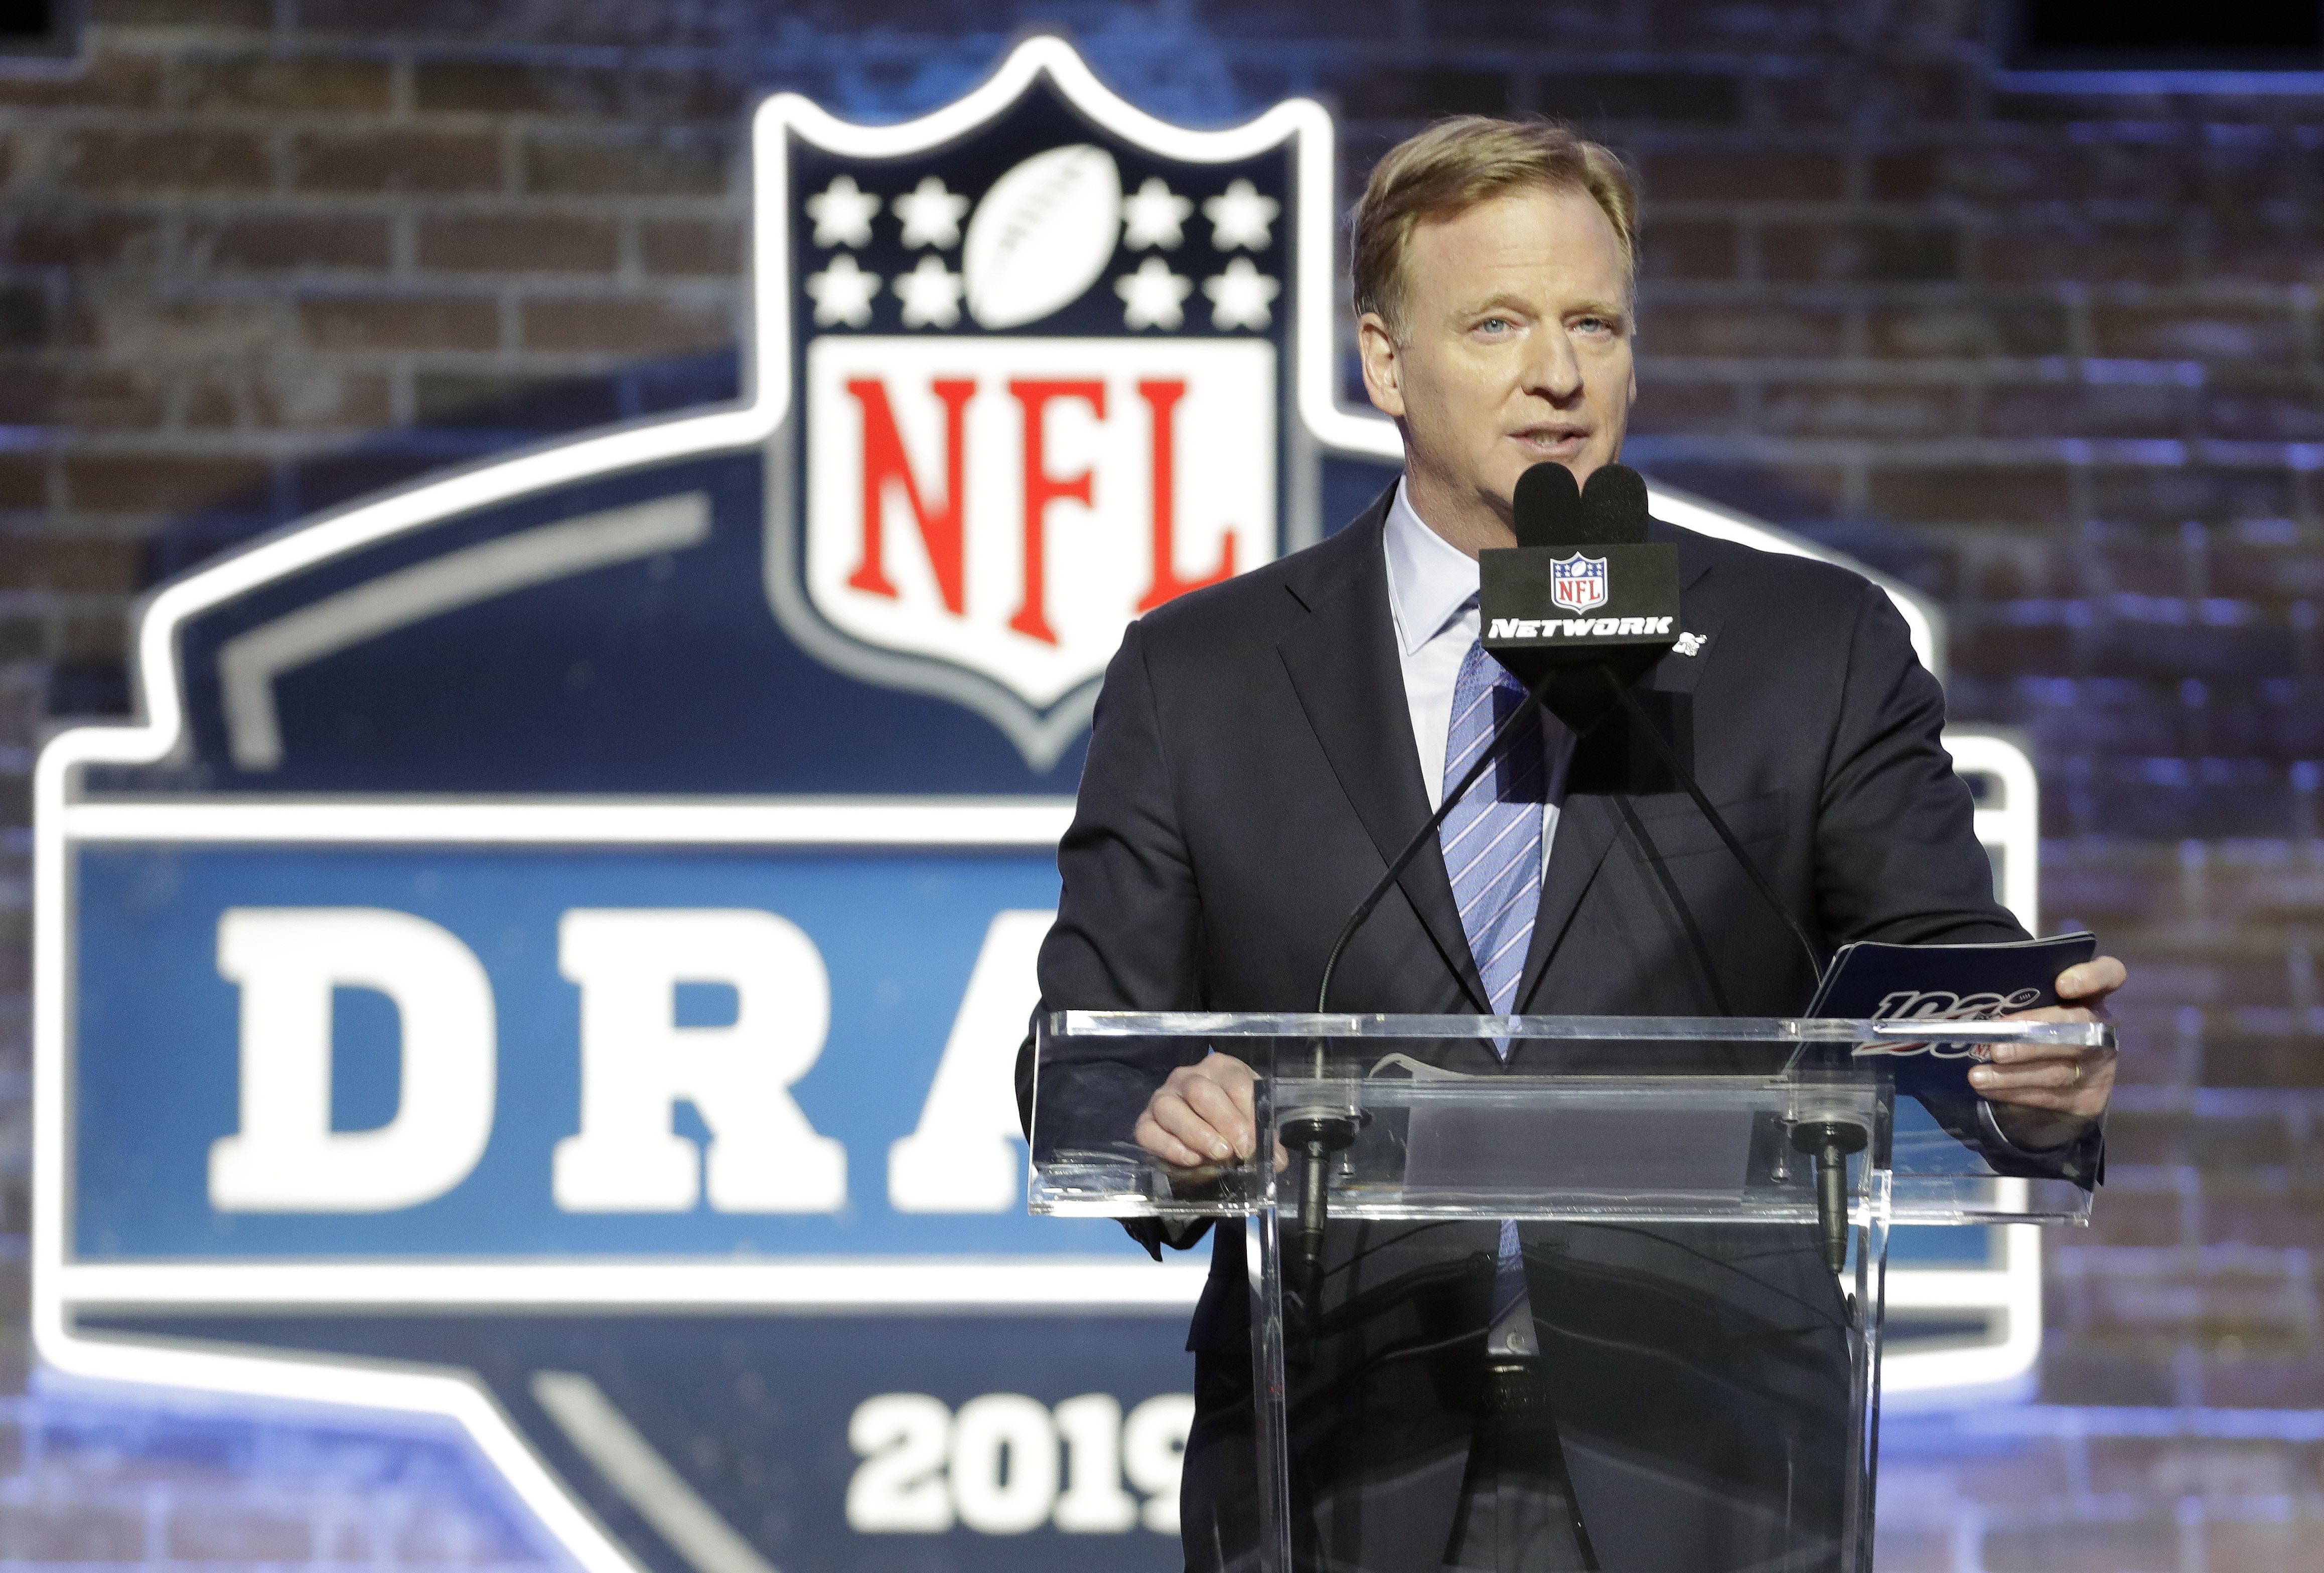 ESPN, NFL Network ready to tackle challenges of remote draft